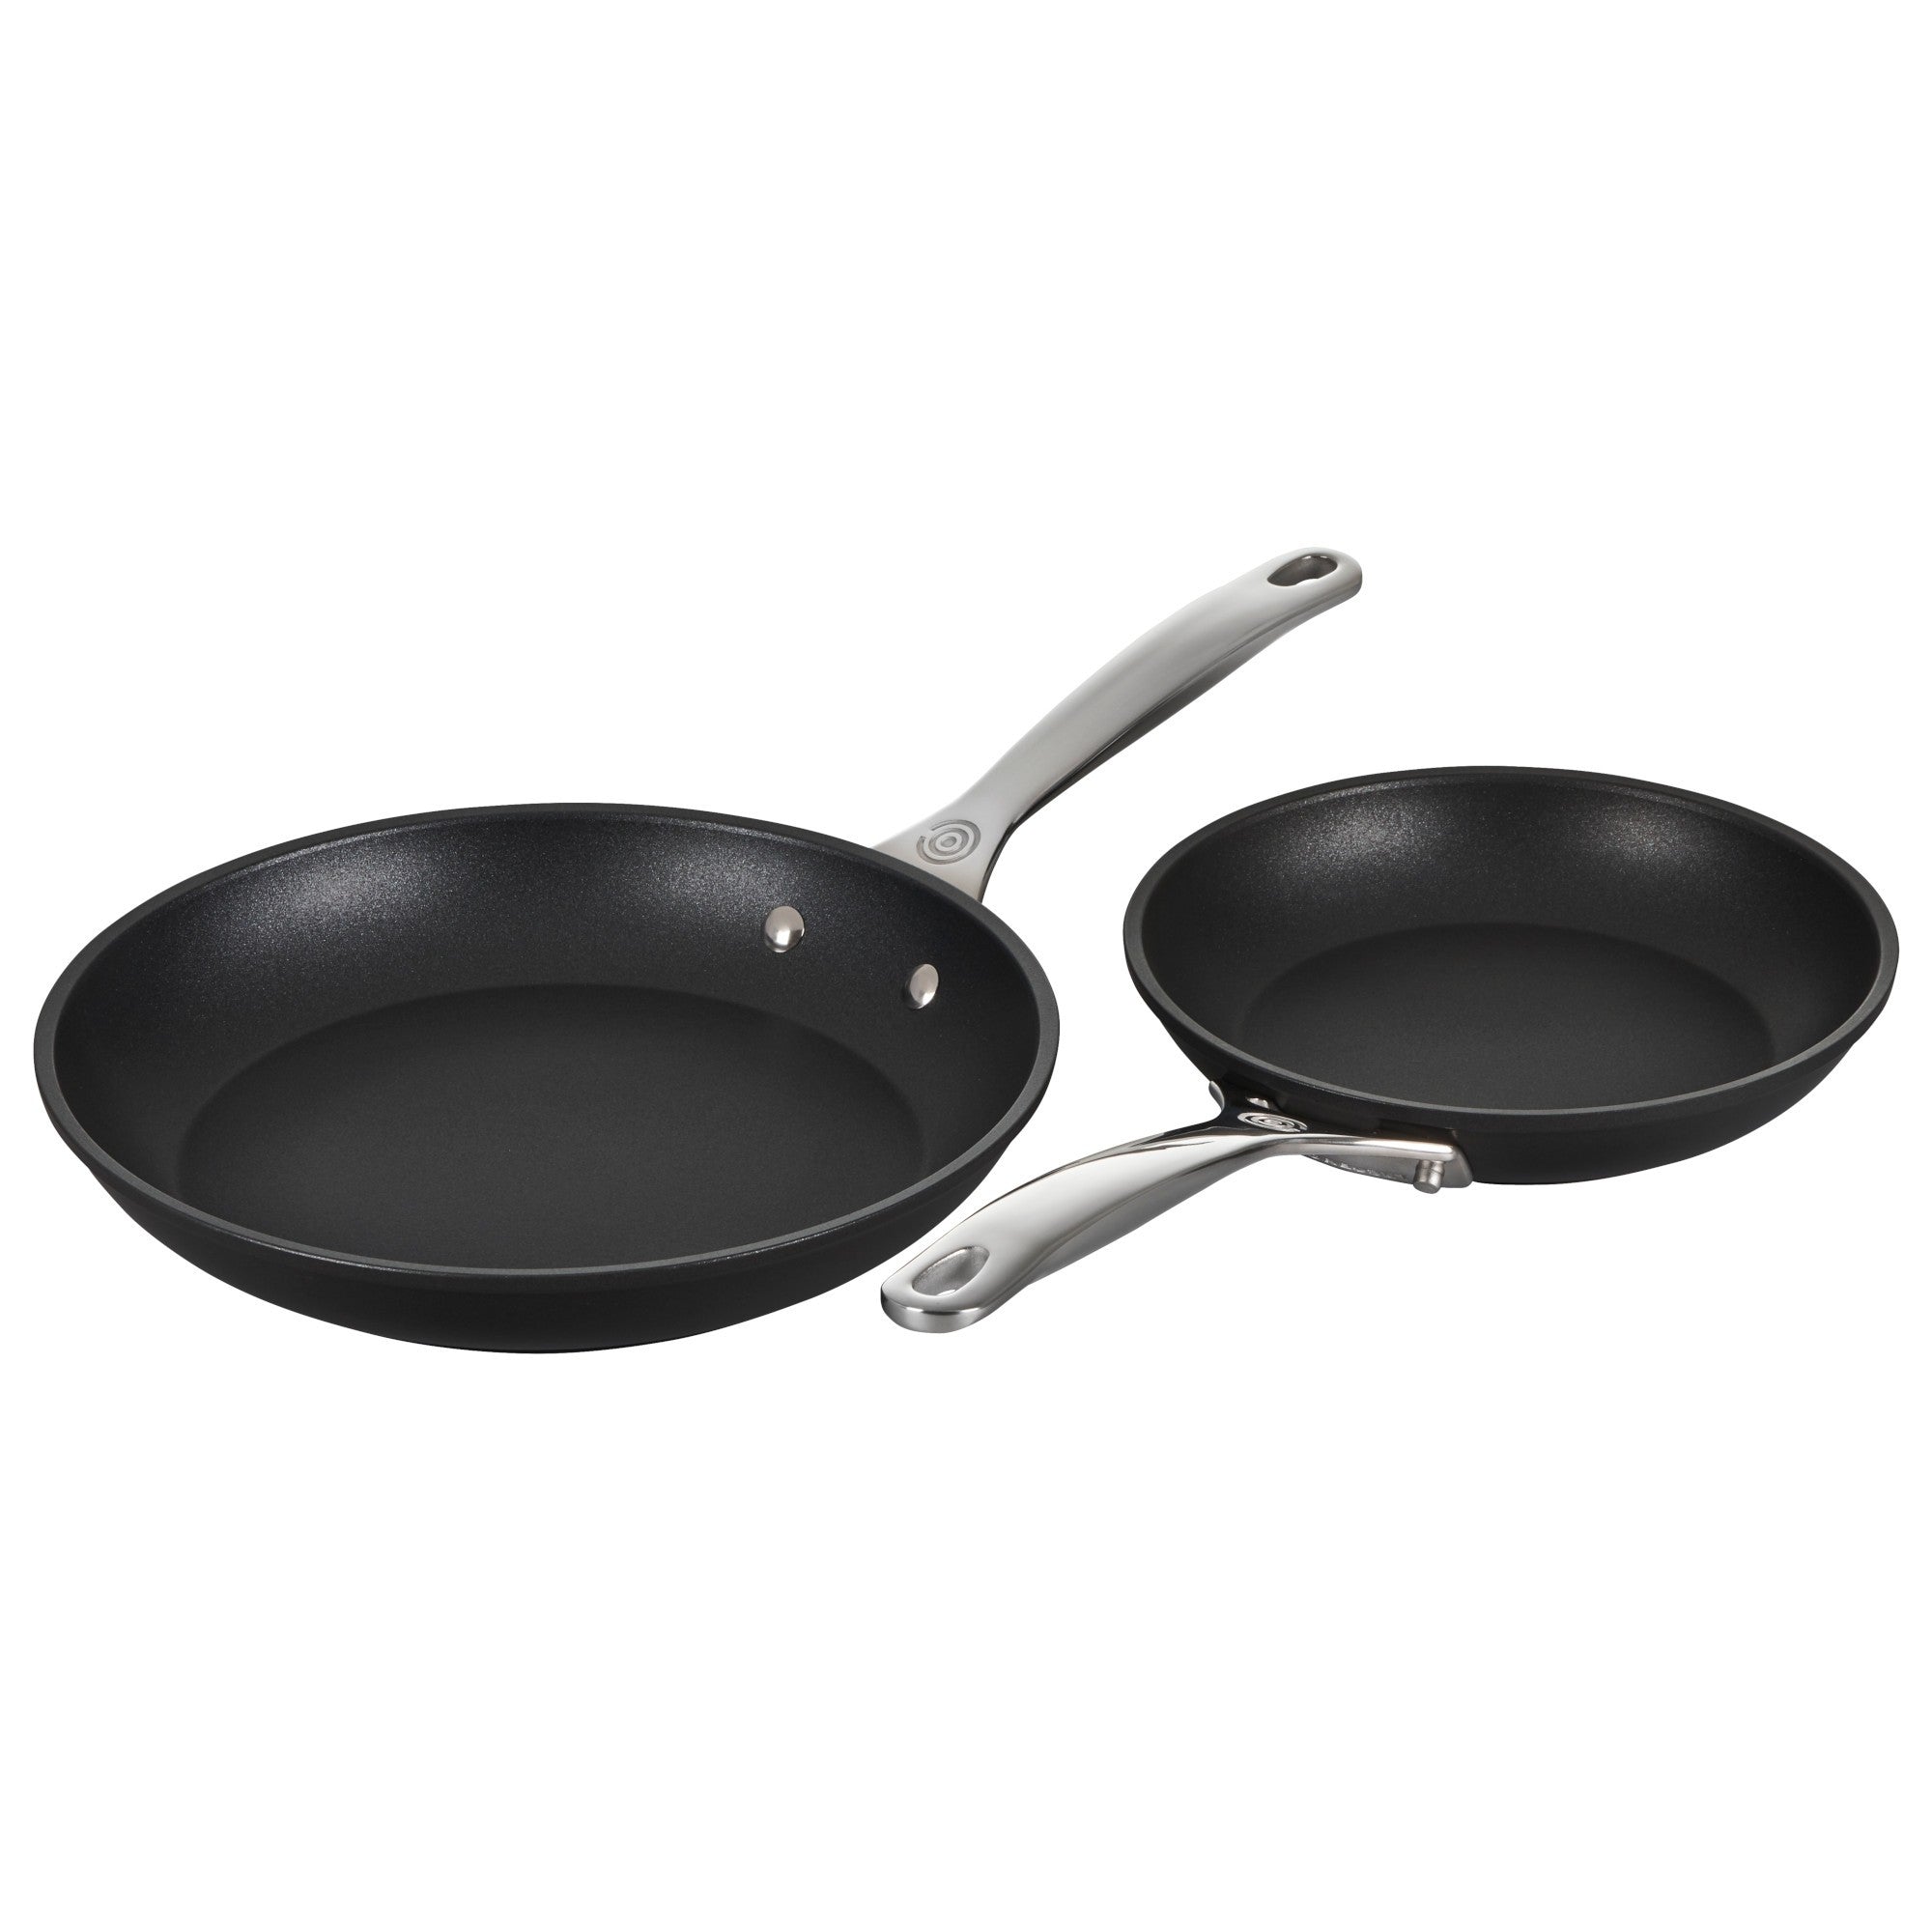 Le Creuset Tri-Ply Stainless Steel 8 Fry Pan, Small